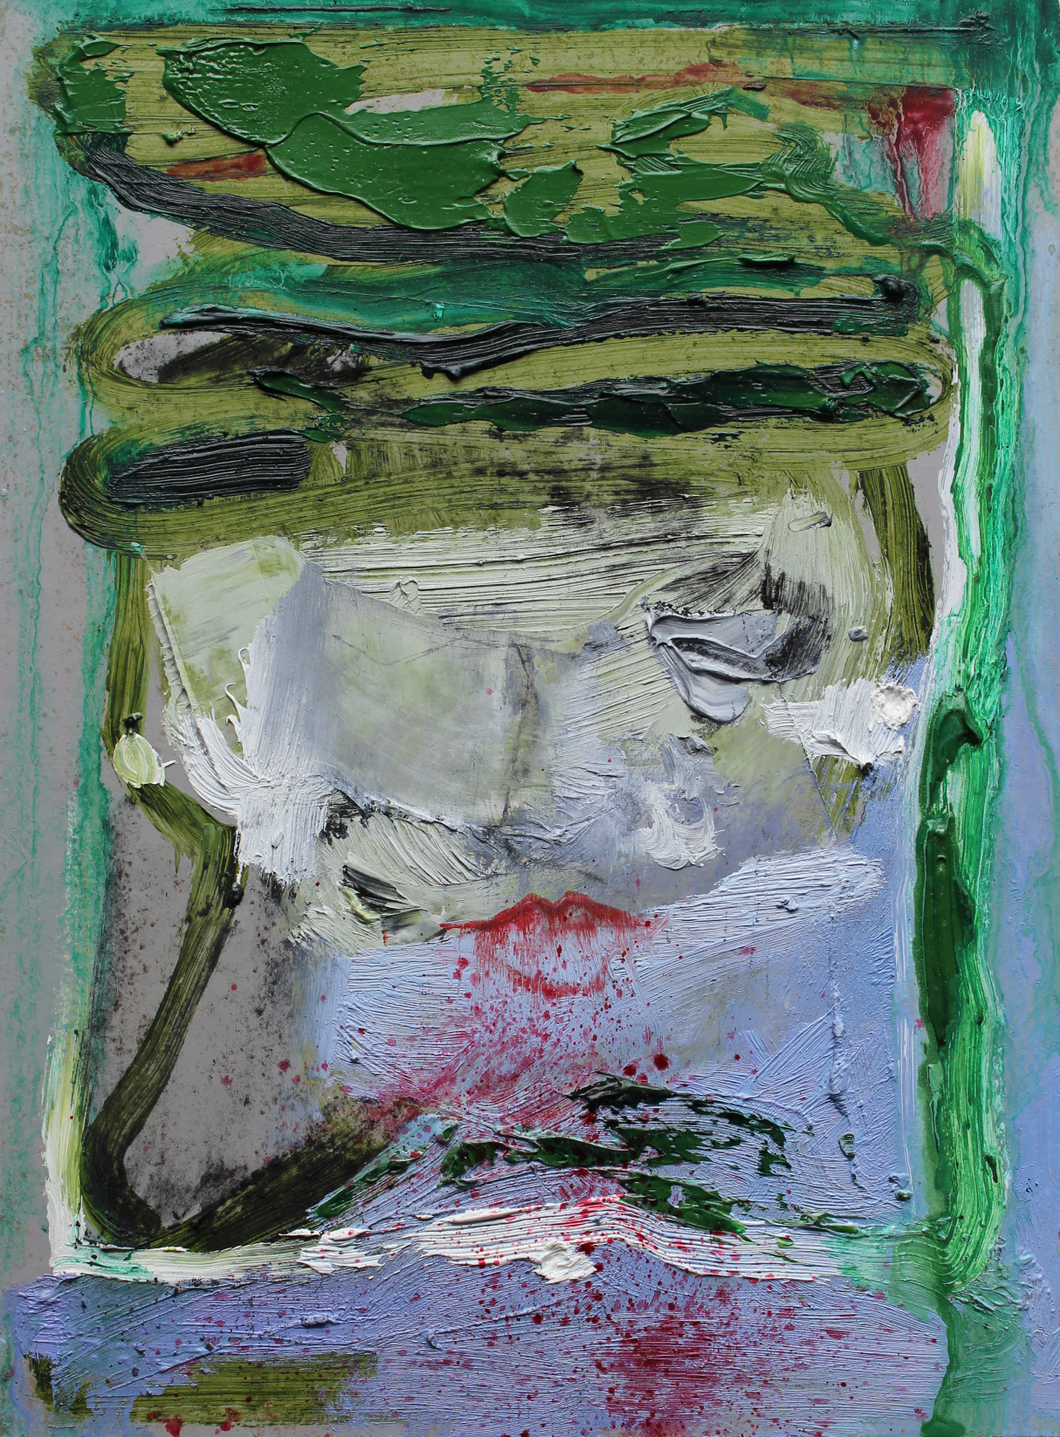 Abstract portrait in grey and green